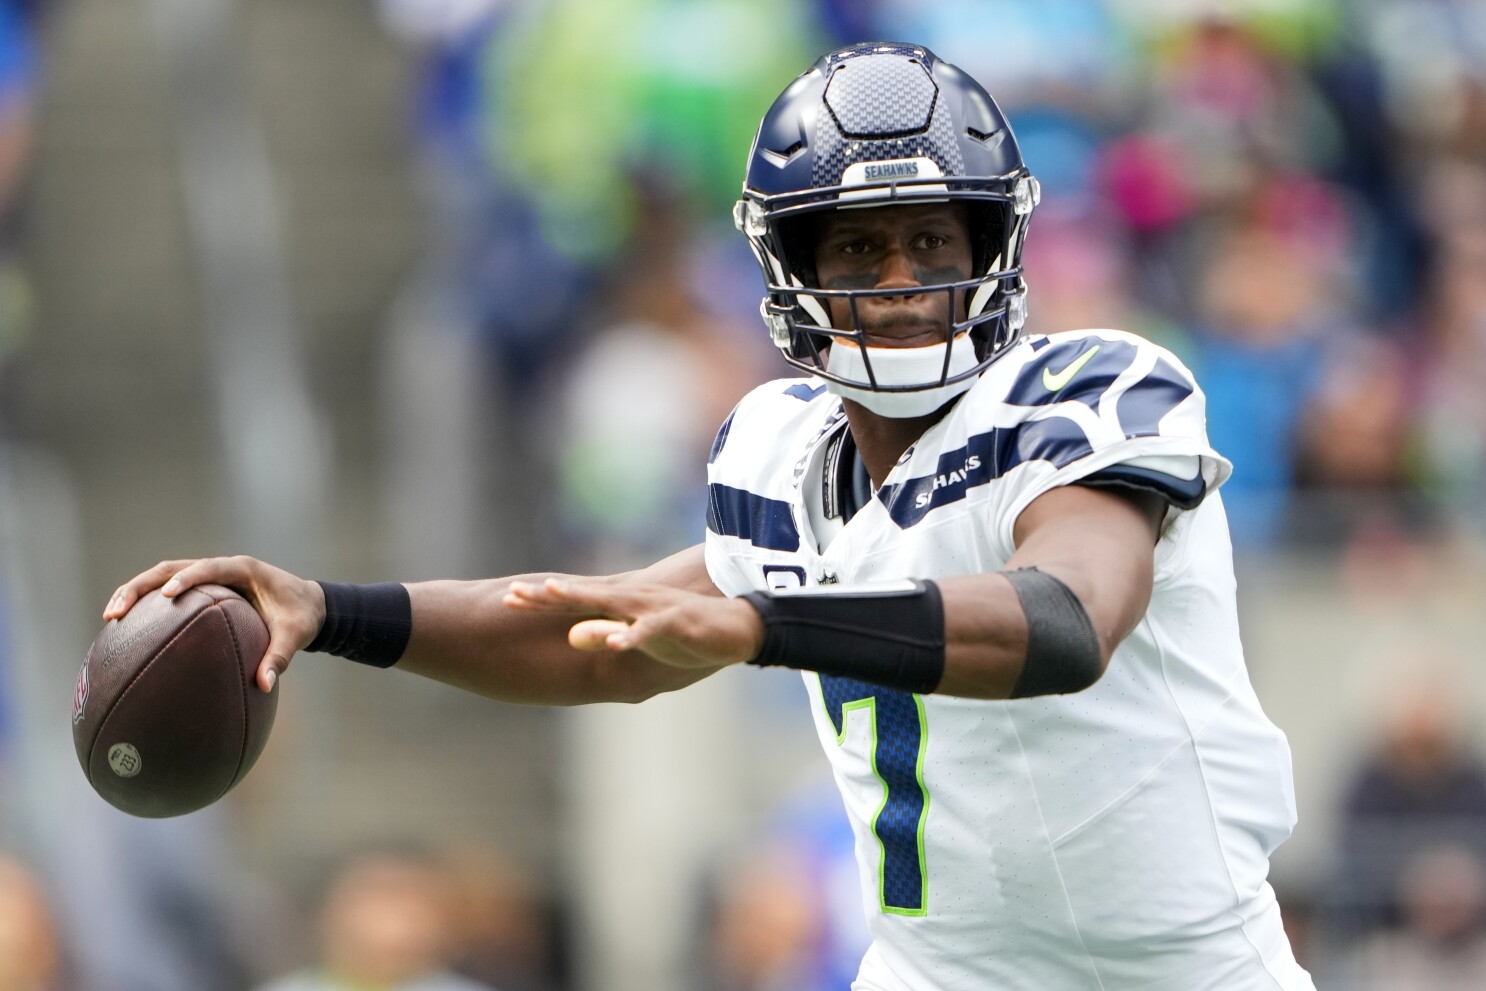 What to know about the Seahawks' Week 4 opponent, the New York Giants